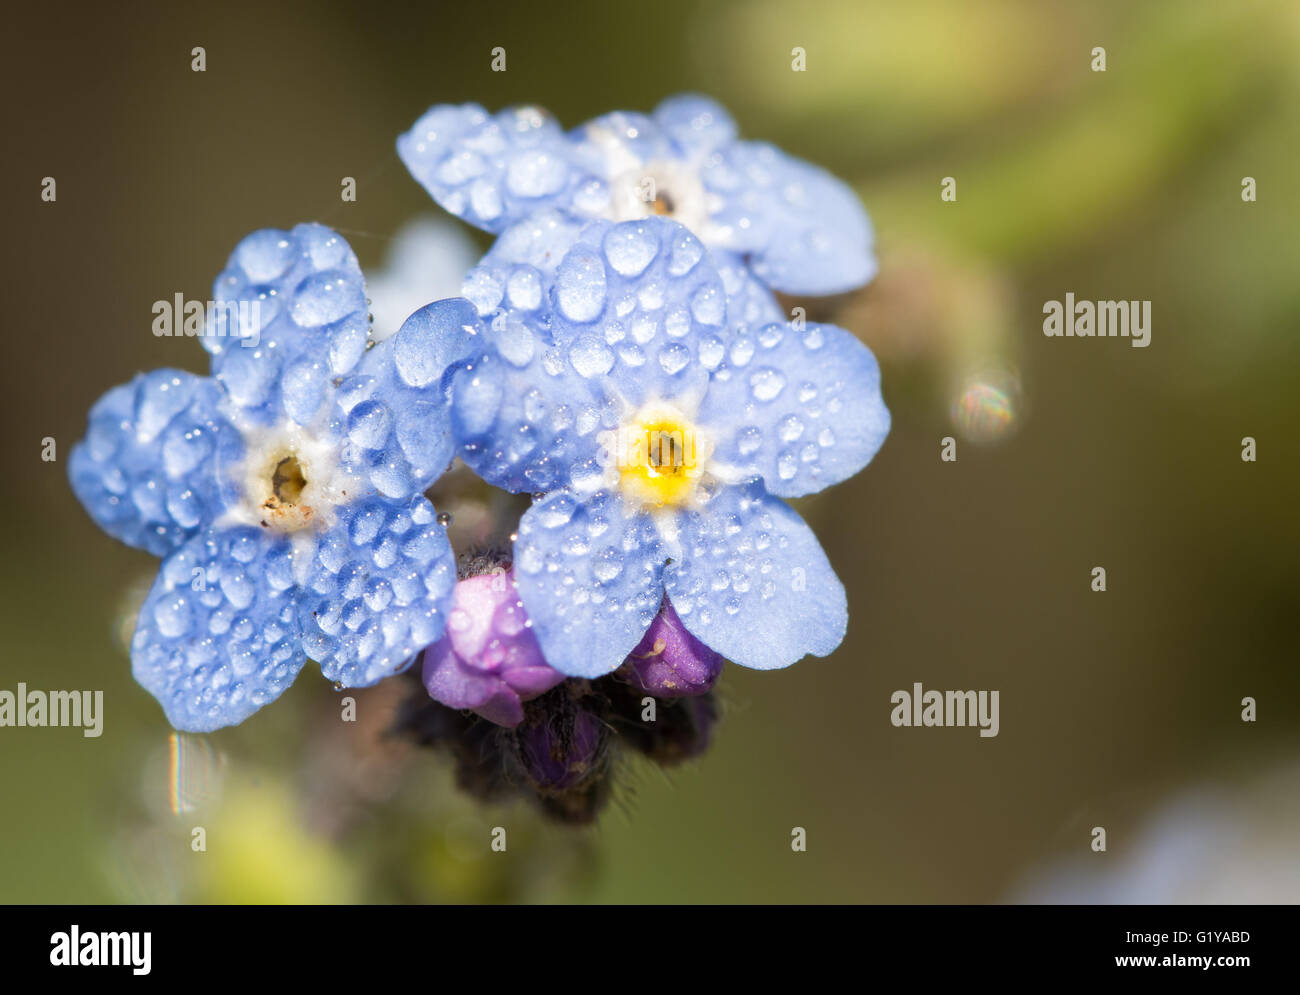 Myosotis, Forget-me-not flowers with dew drops in morning sun Stock Photo